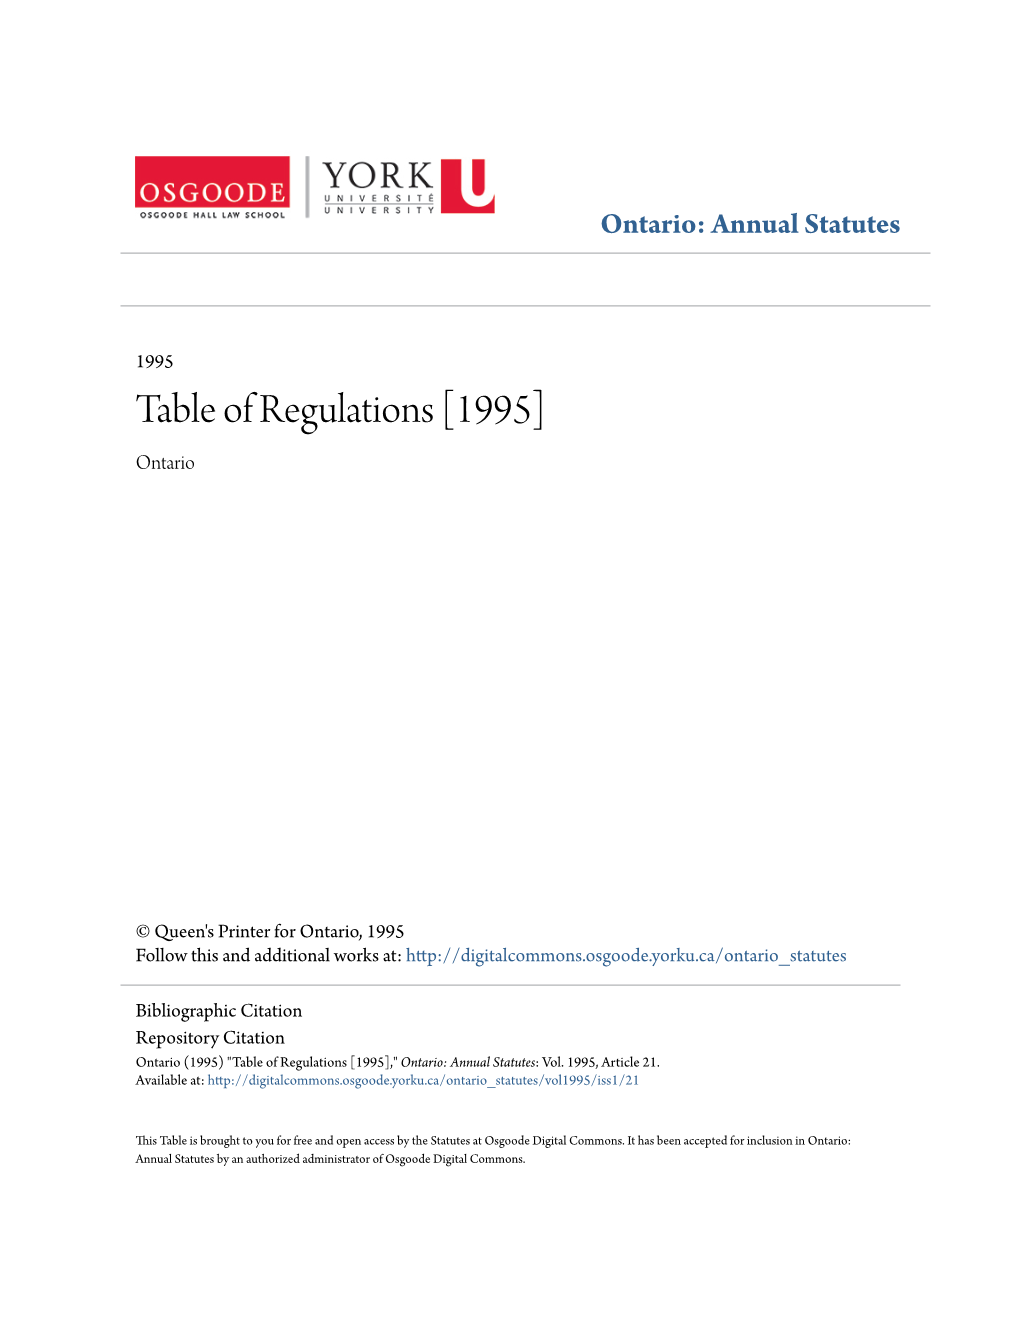 Table of Regulations [1995] Ontario